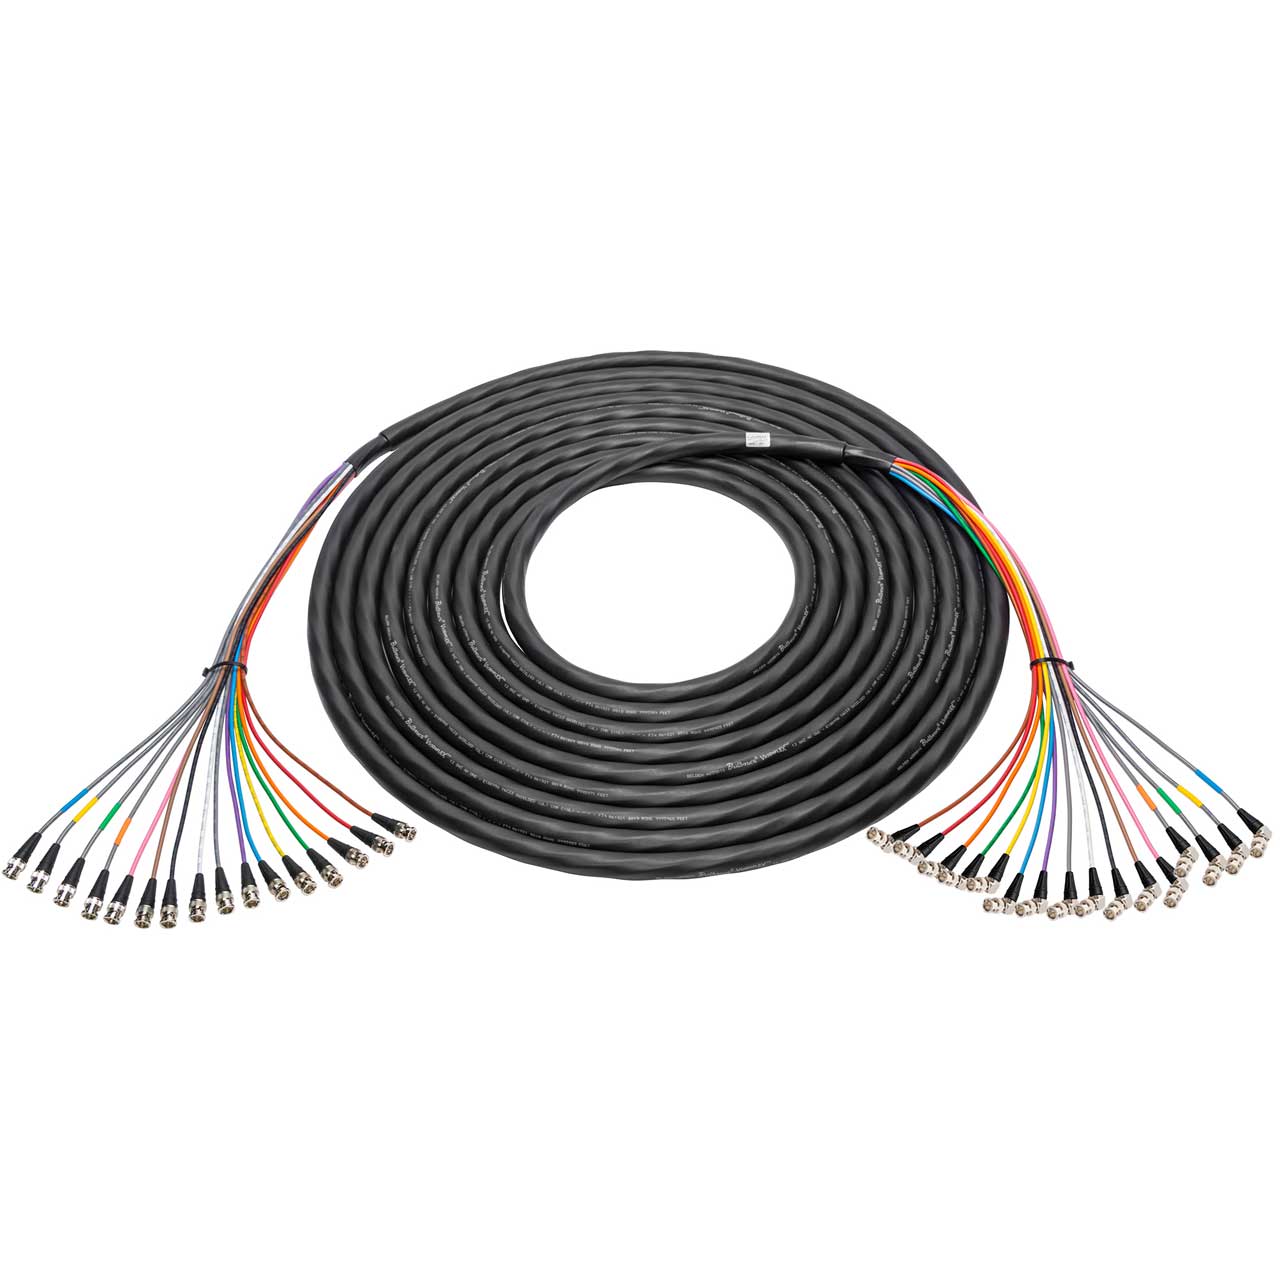 Laird 4855R16-BBA-010 16-Channel 12G-SDI/4K UHD BNC Male to Right Angle BNC Male Snake Cable - 10 Foot 4855R16-BBA-010